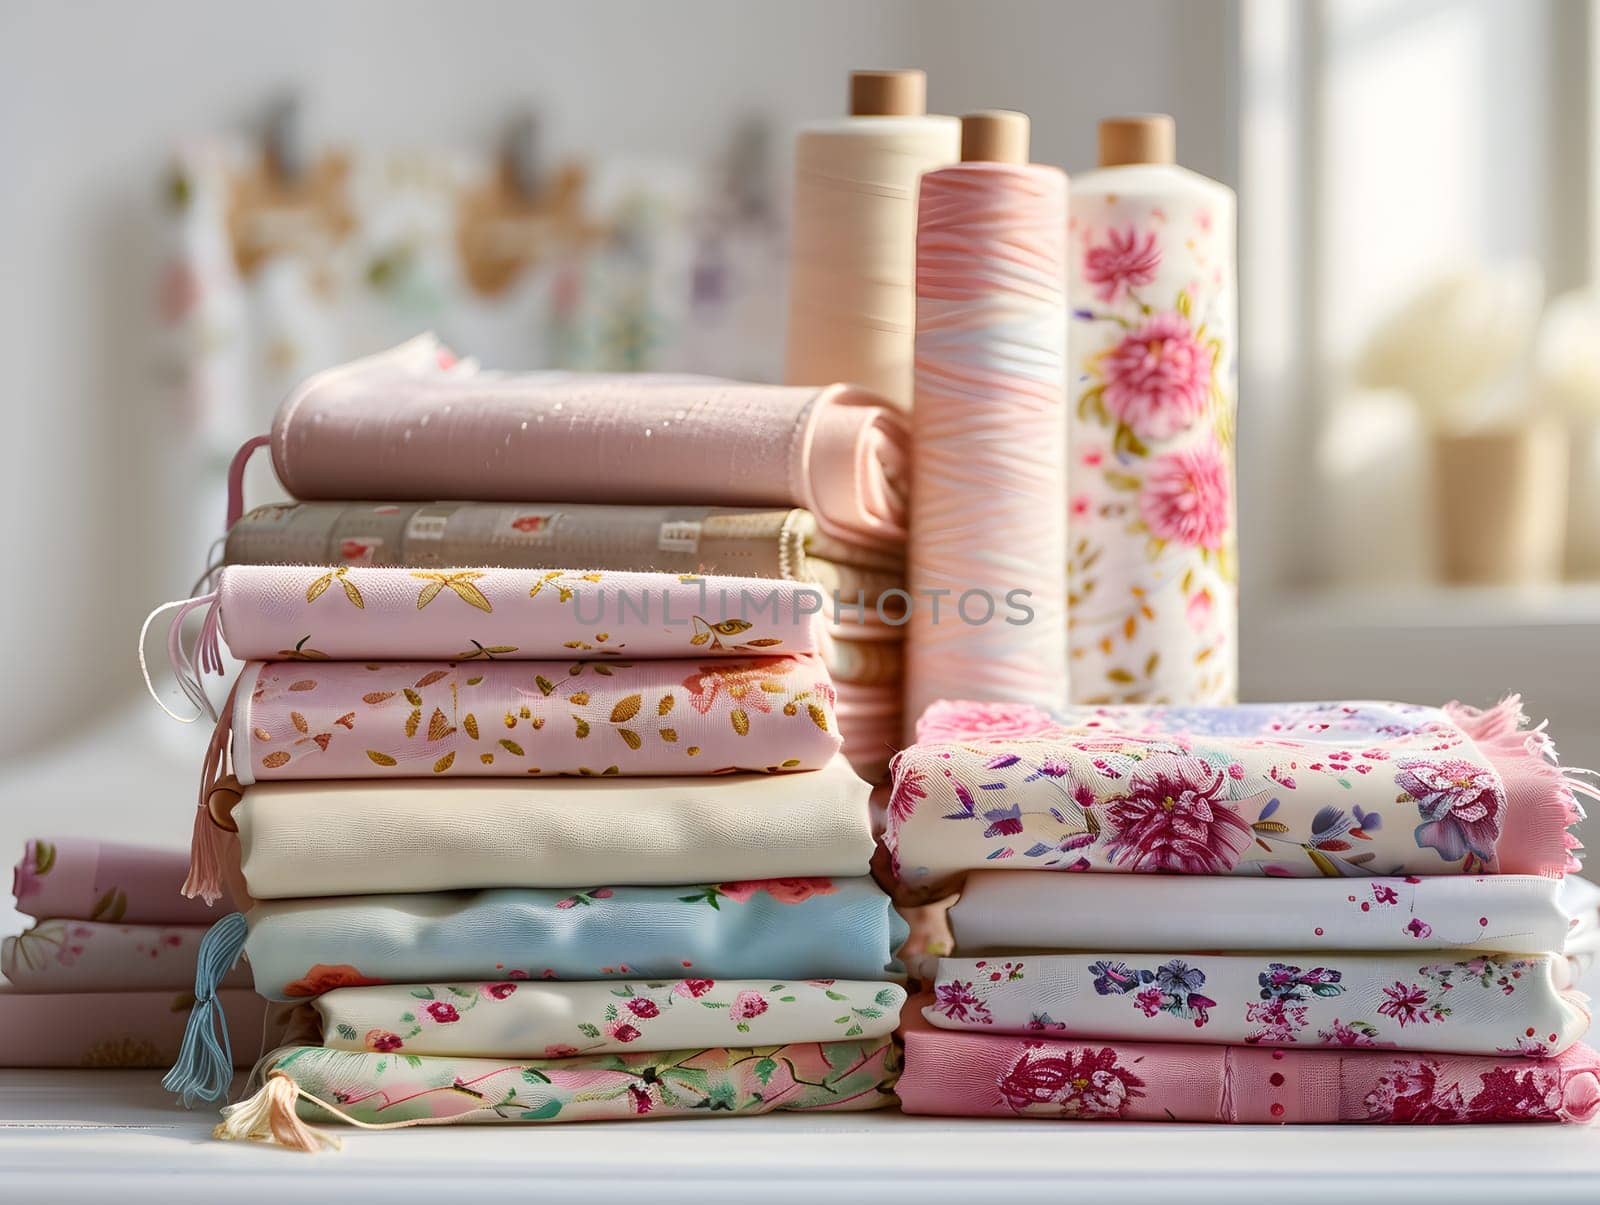 A variety of rectangle rolls of fabric in shades of pink, magenta, and peach are stacked on a wood table, creating a colorful display of linens for fashion accessories